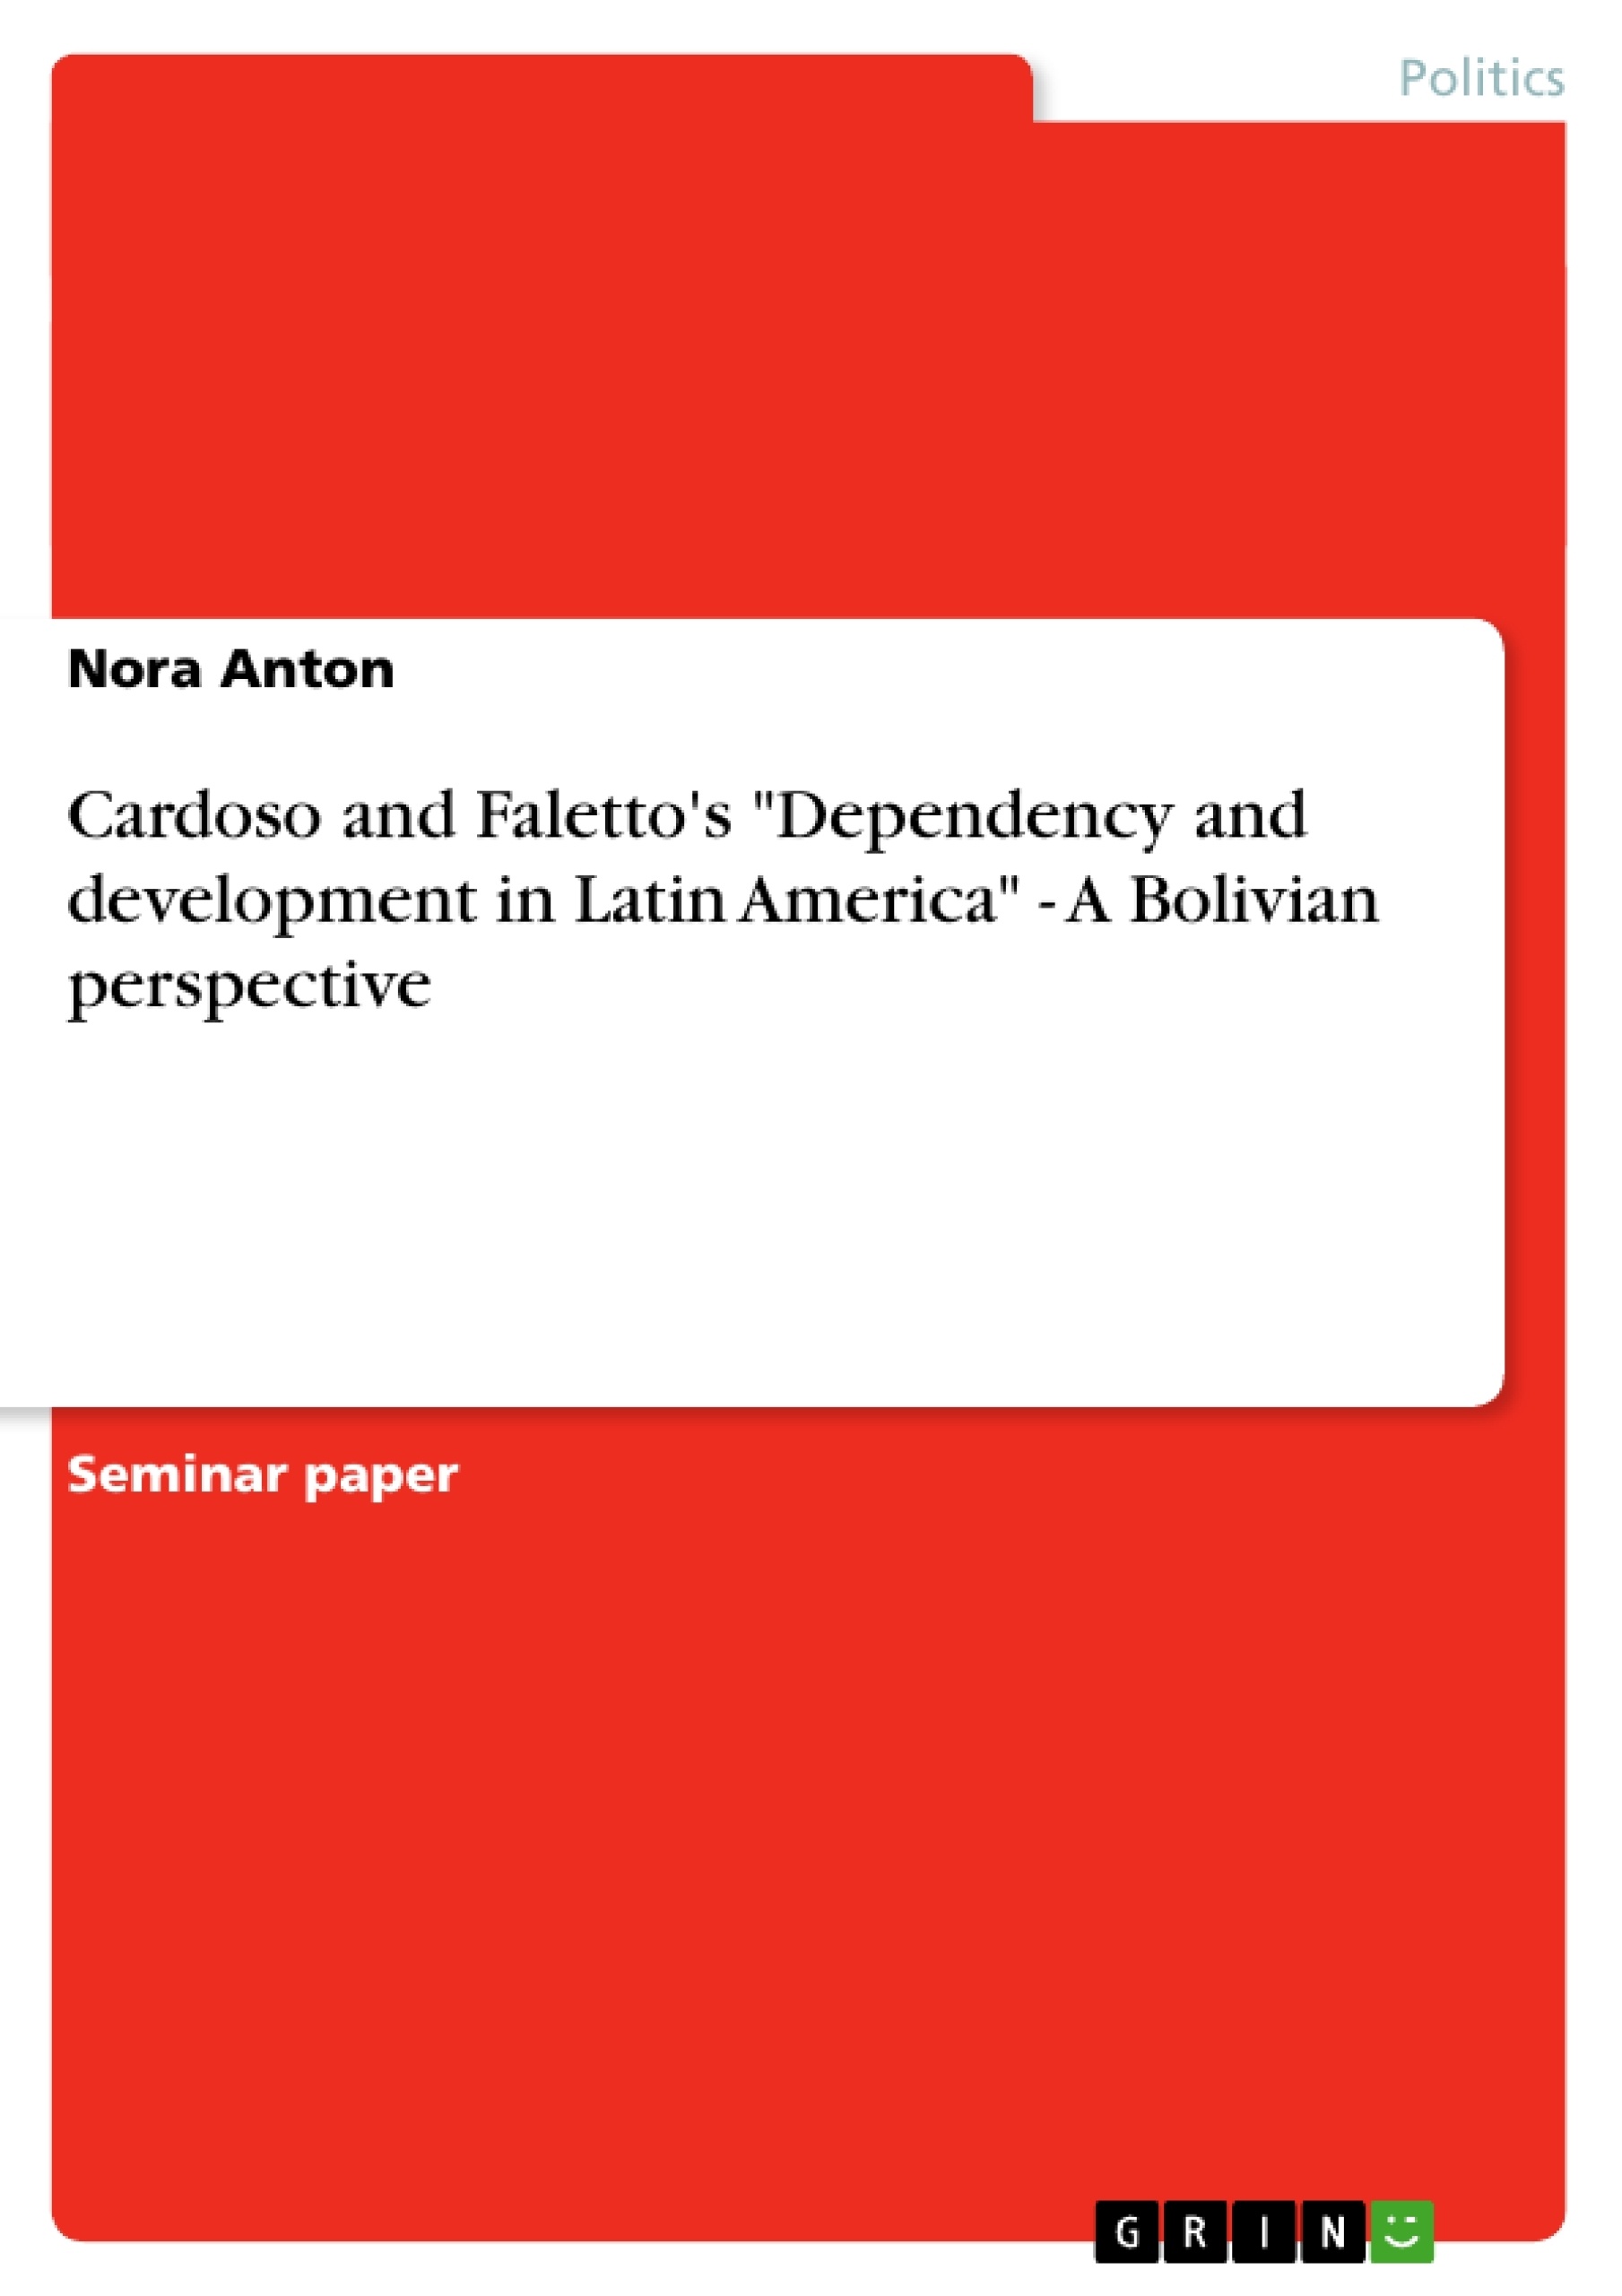 Title: Cardoso and Faletto's "Dependency and development in Latin America"   -  A Bolivian perspective